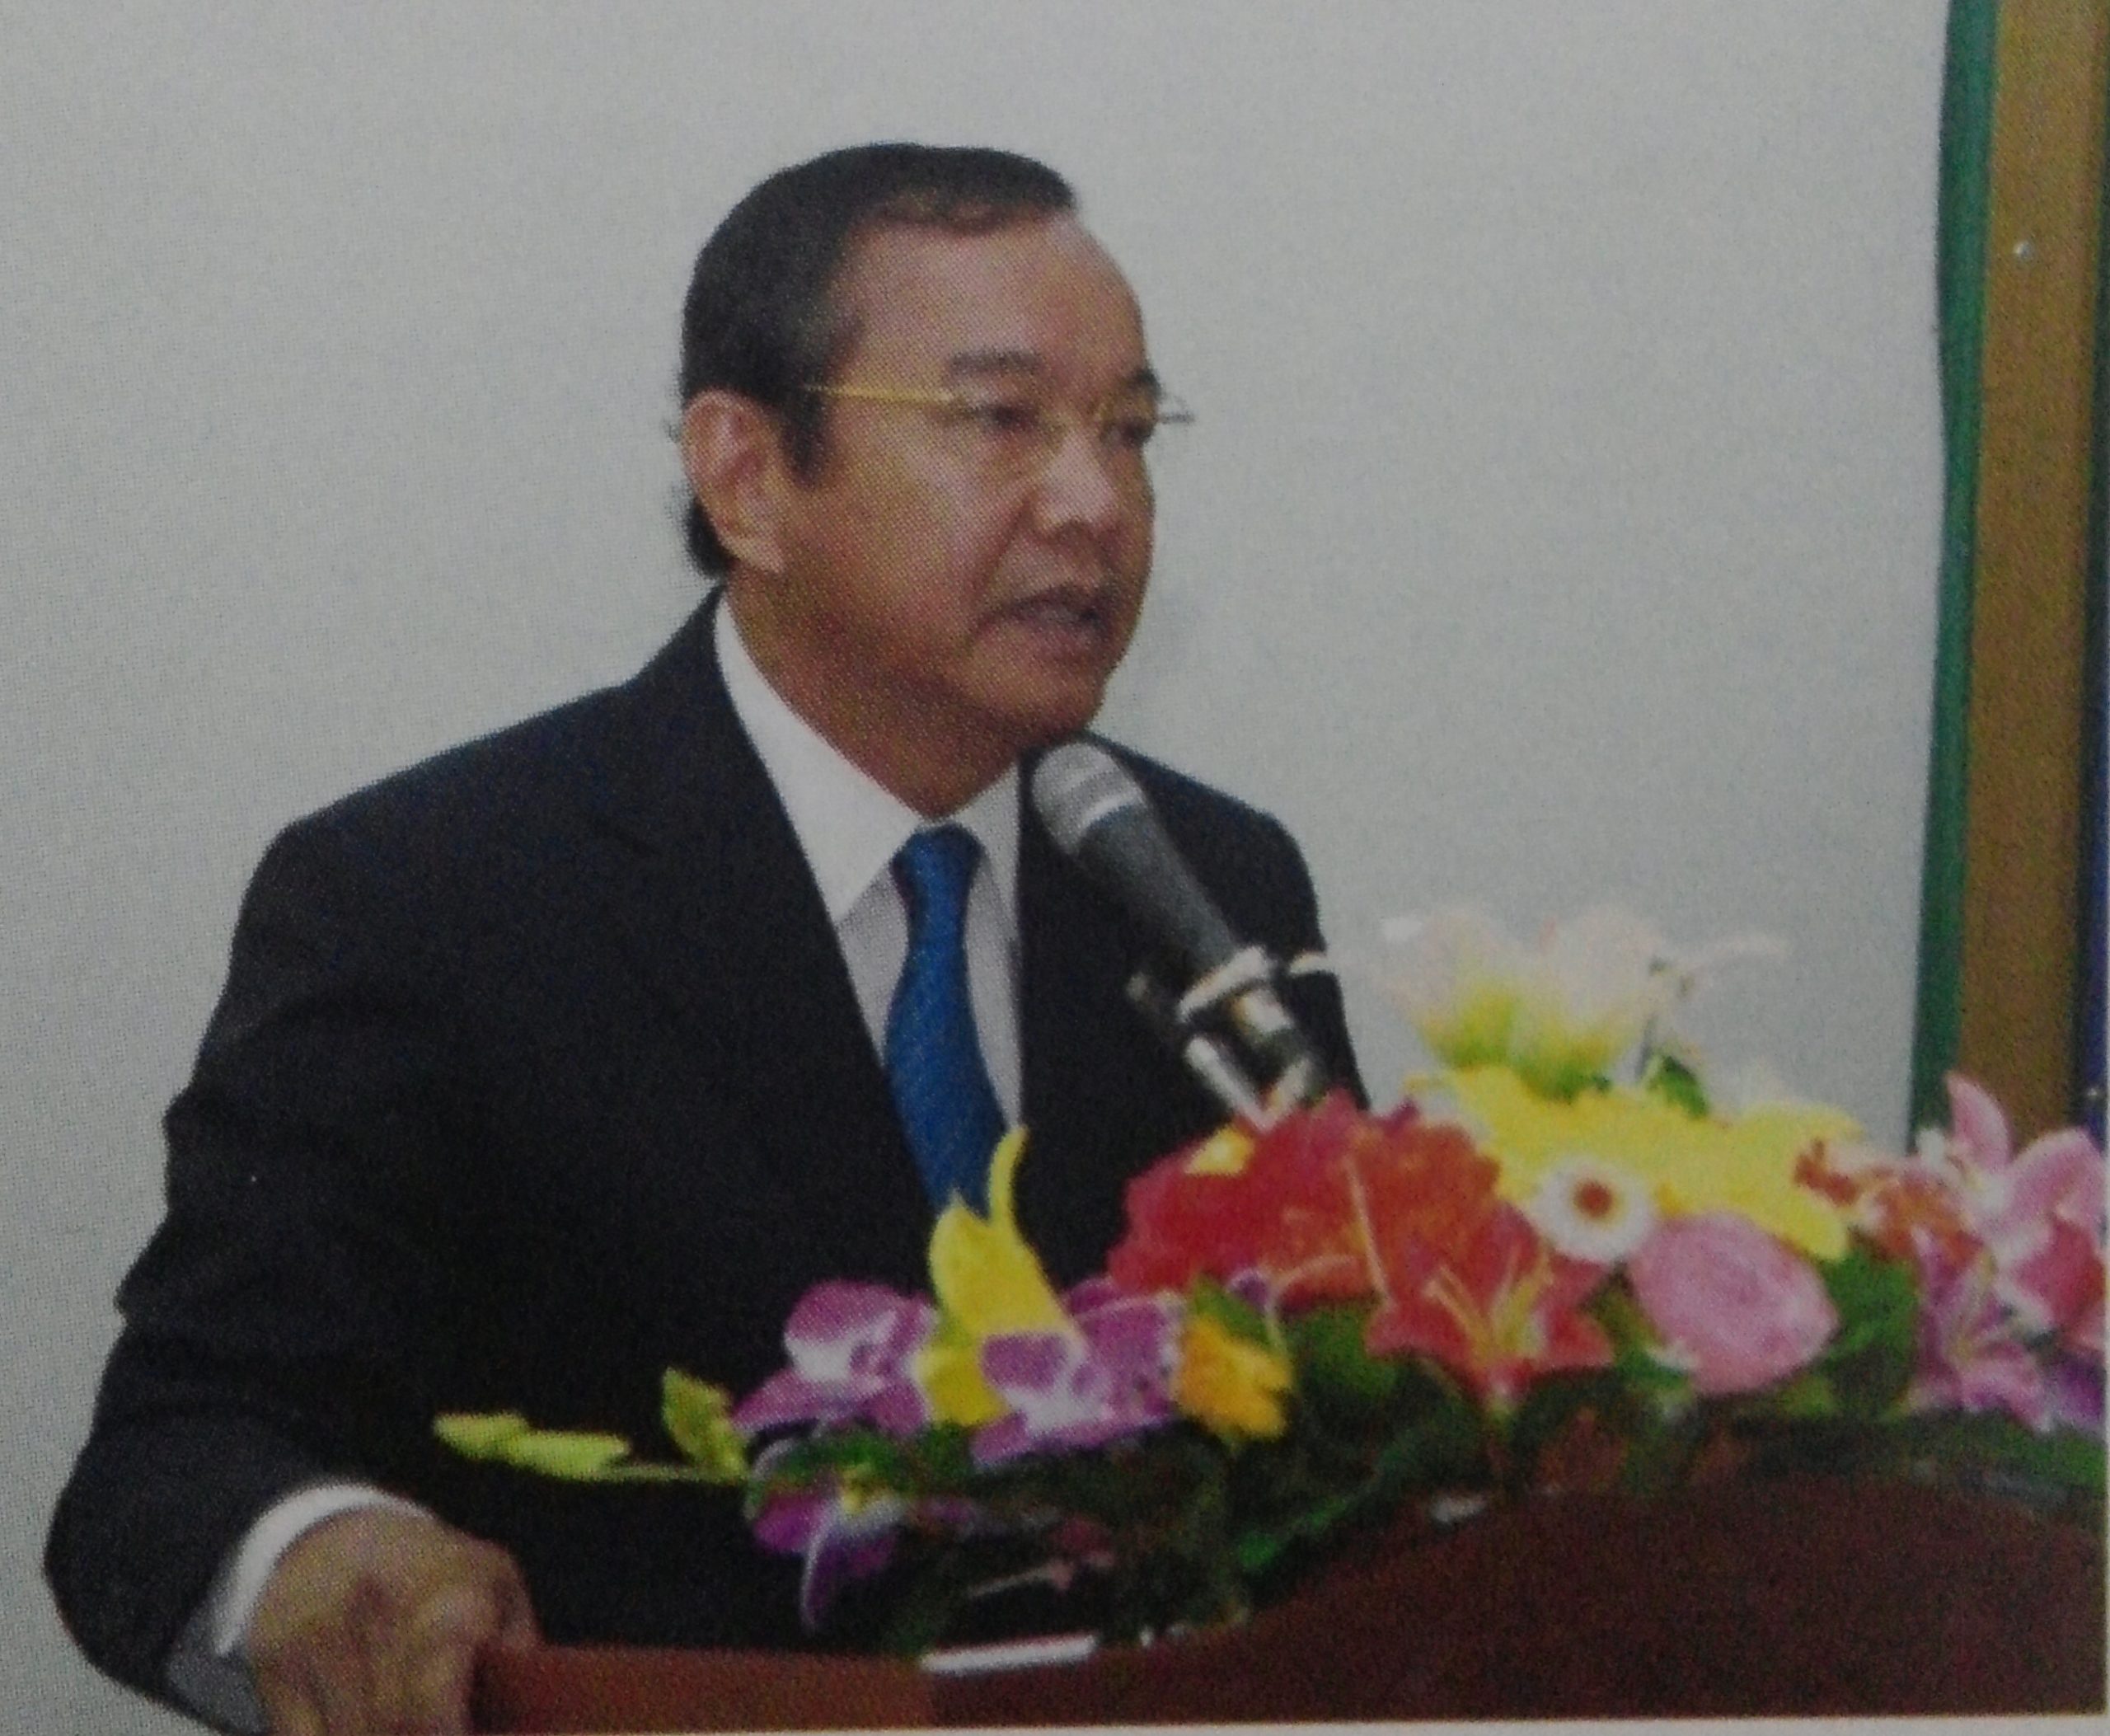 Ceremony to Reshuffle Head of Koh Kong Provincial Posts and Telecommunications Department